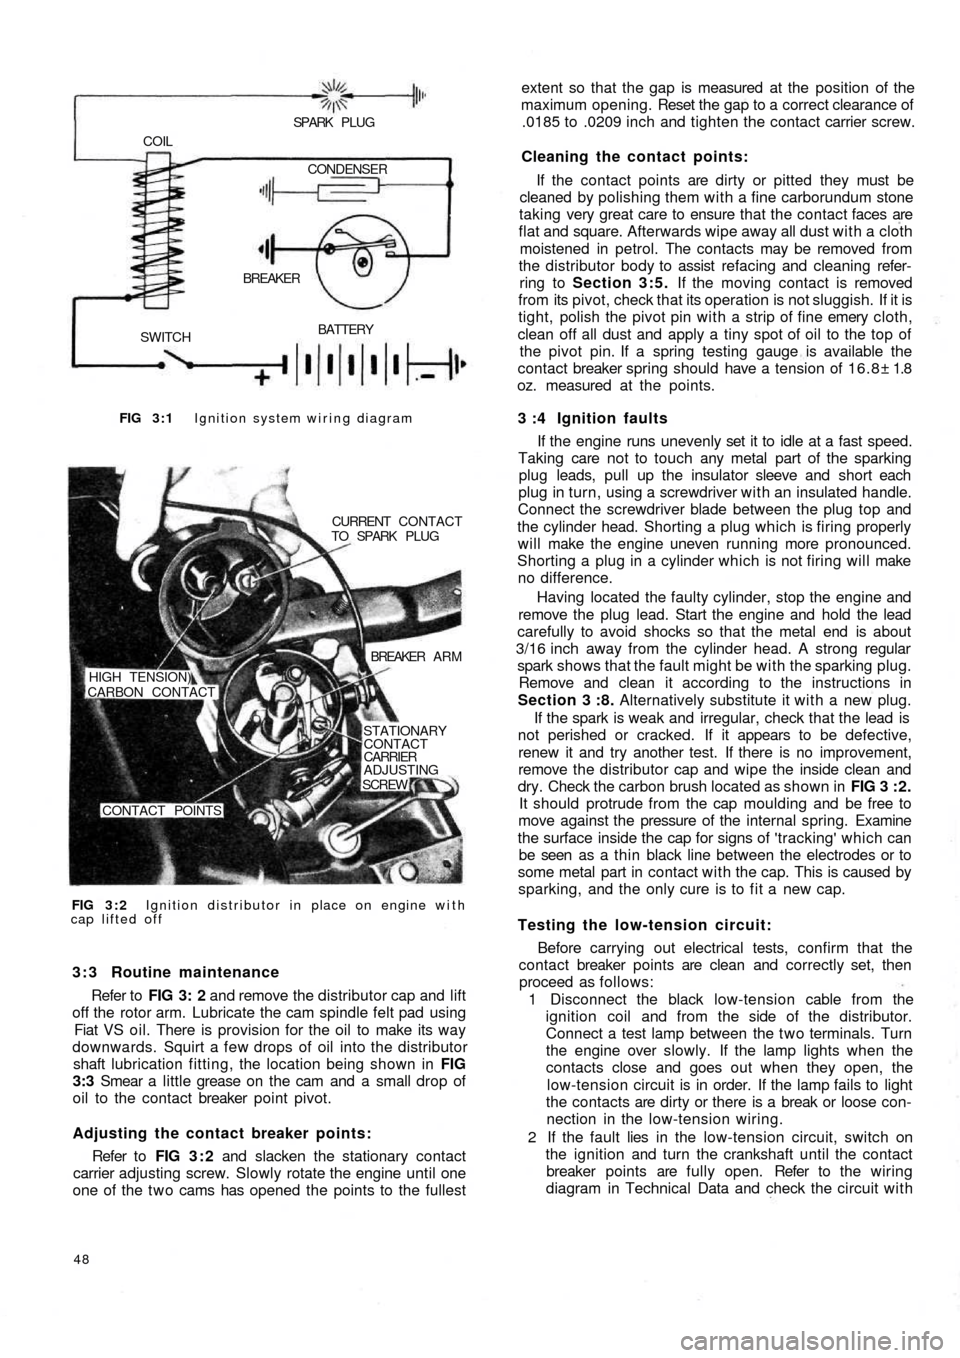 FIAT 500 1970 1.G Service Manual FIG 3 : 1 Ignition system wiring diagram
BATTERY
SWITCHBREAKER COIL
SPARK  PLUG
CONDENSER
FIG 3 : 2 Ignition distributor in place on engine with
cap lifted offCURRENT  CONTACT
TO  SPARK  PLUG
BREAKER 